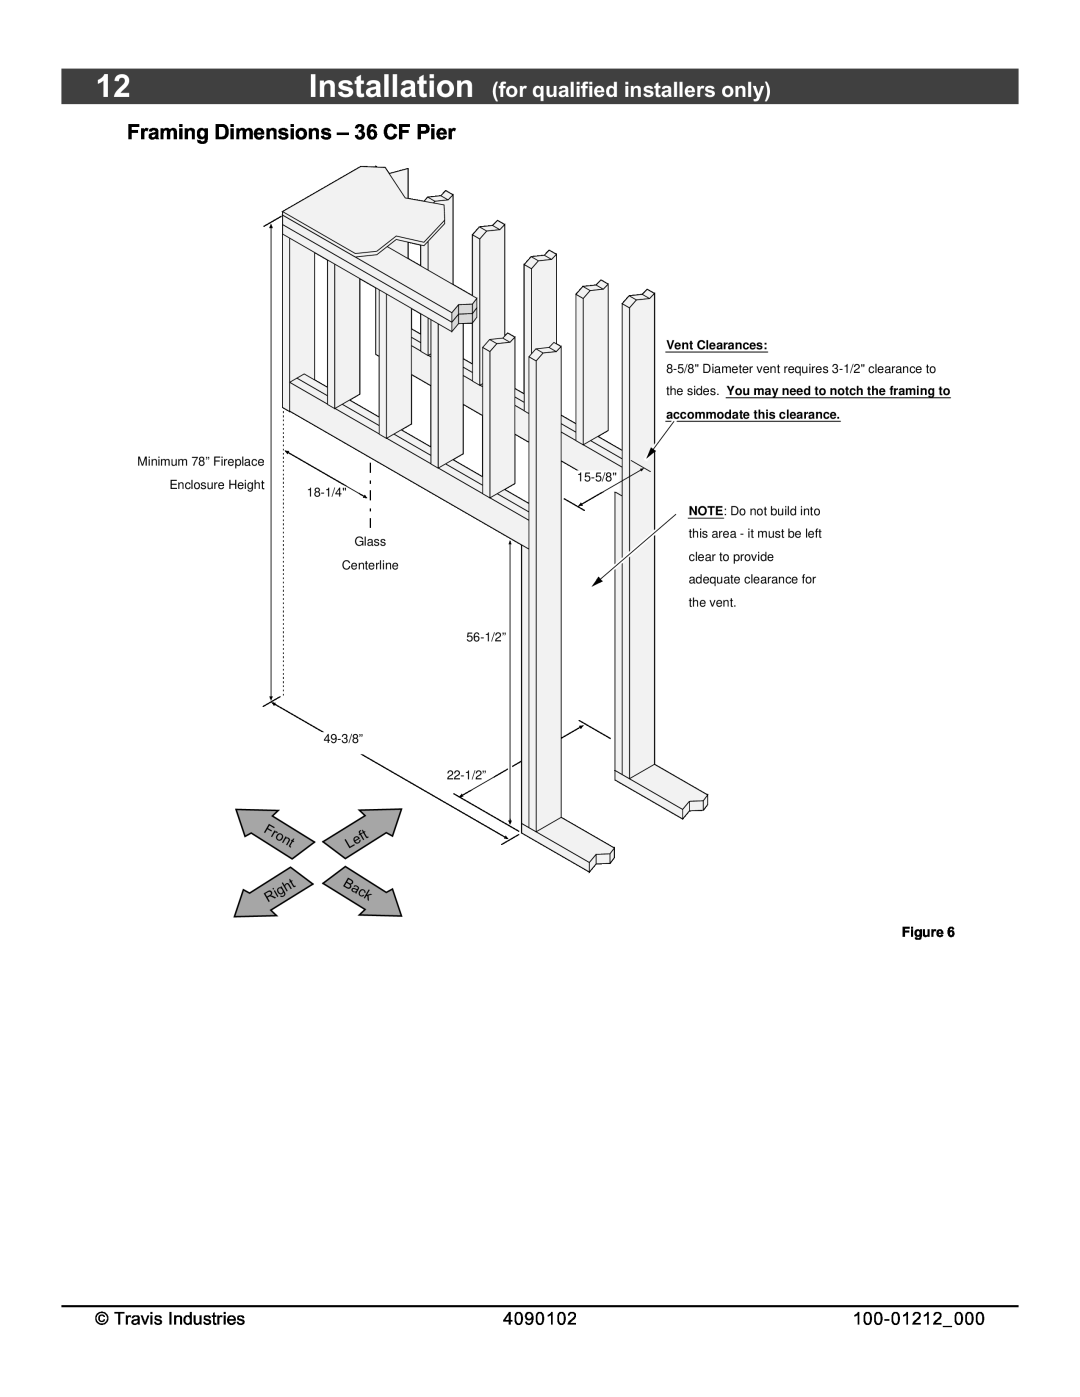 FireplaceXtrordinair 36CF Framing Dimensions - 36 CF Pier, Installation for qualified installers only, Front 